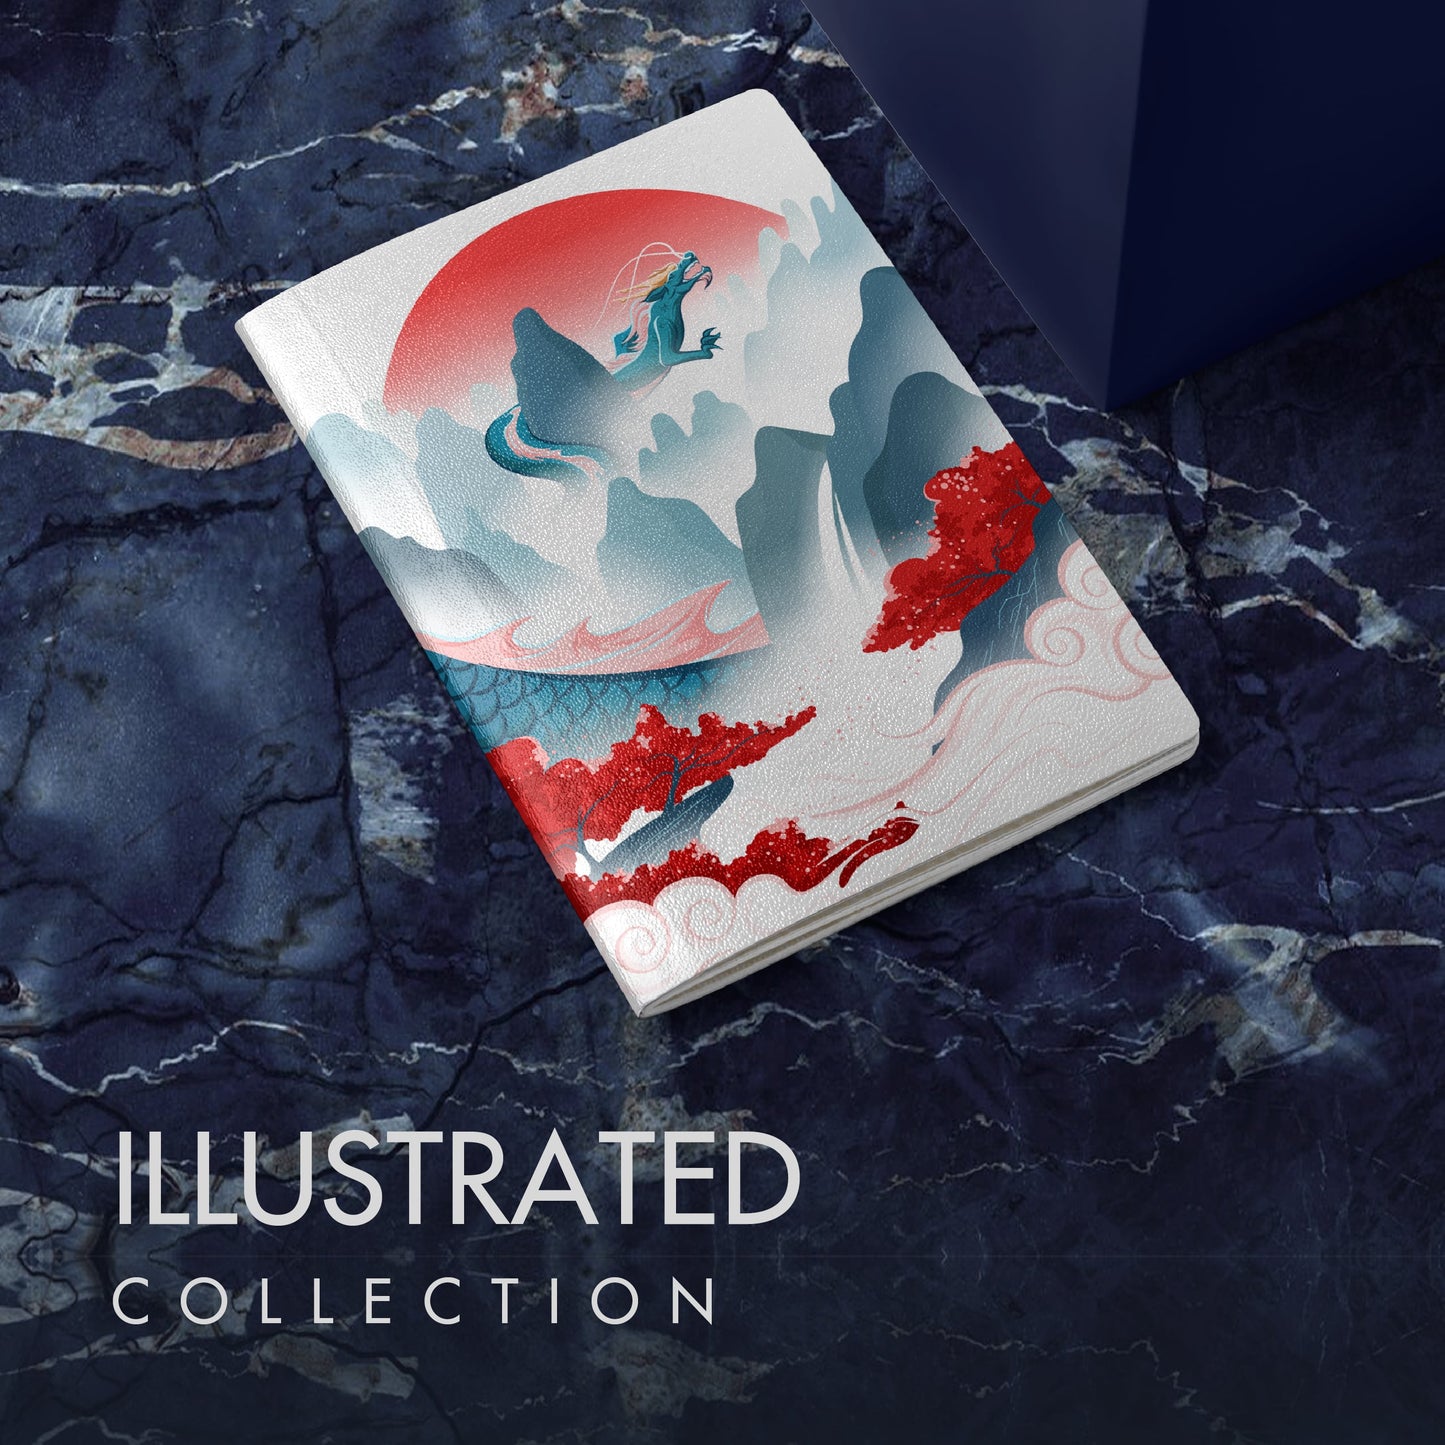 Illustrated Collection - Creative Passport Cover